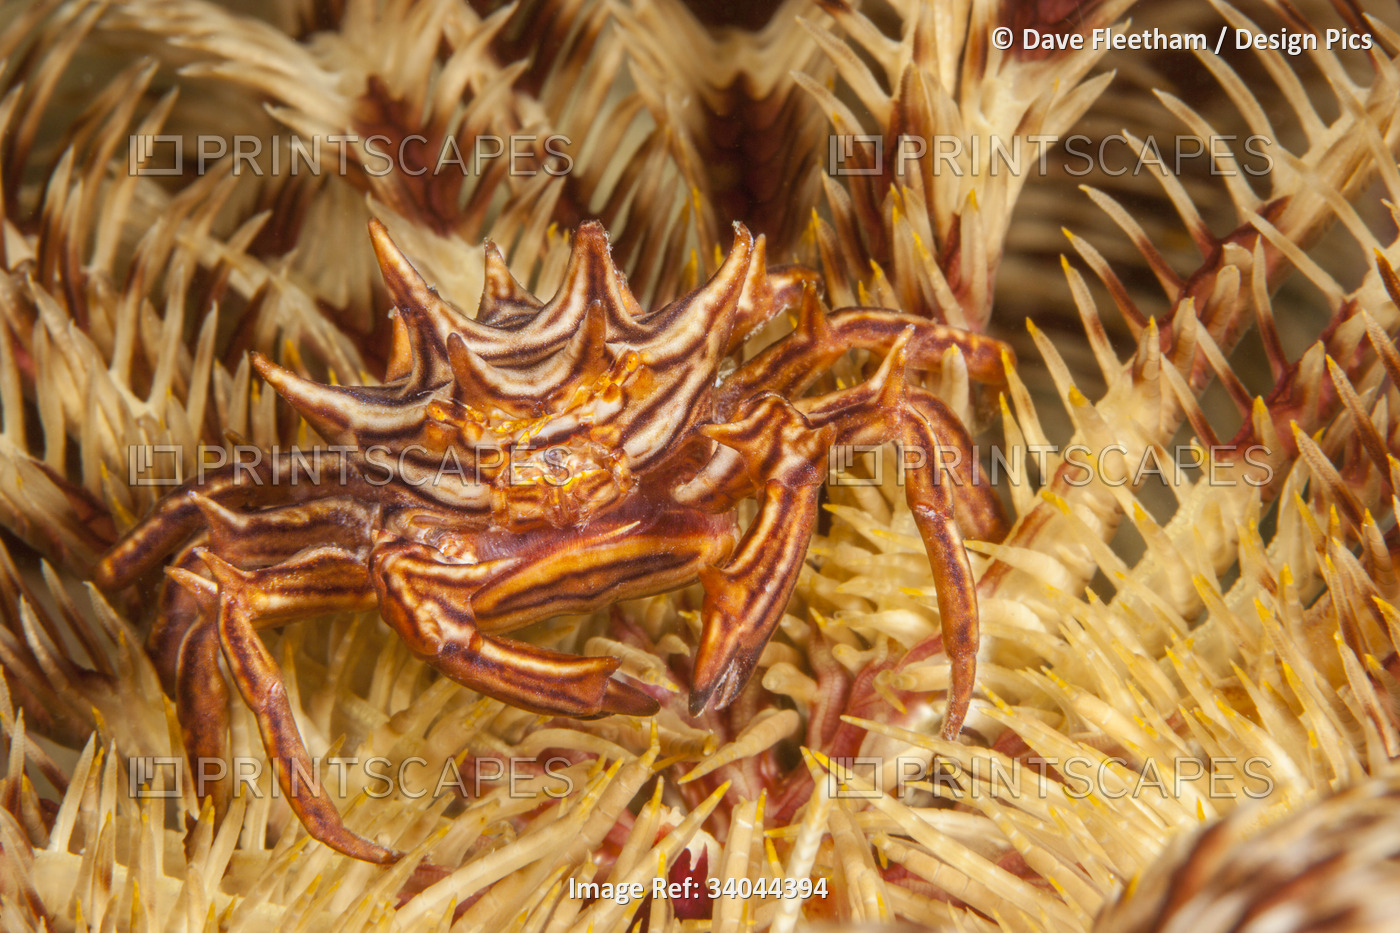 The Zebra urchin crab (Zebrida adamsii), as the name suggests, is usually found ...